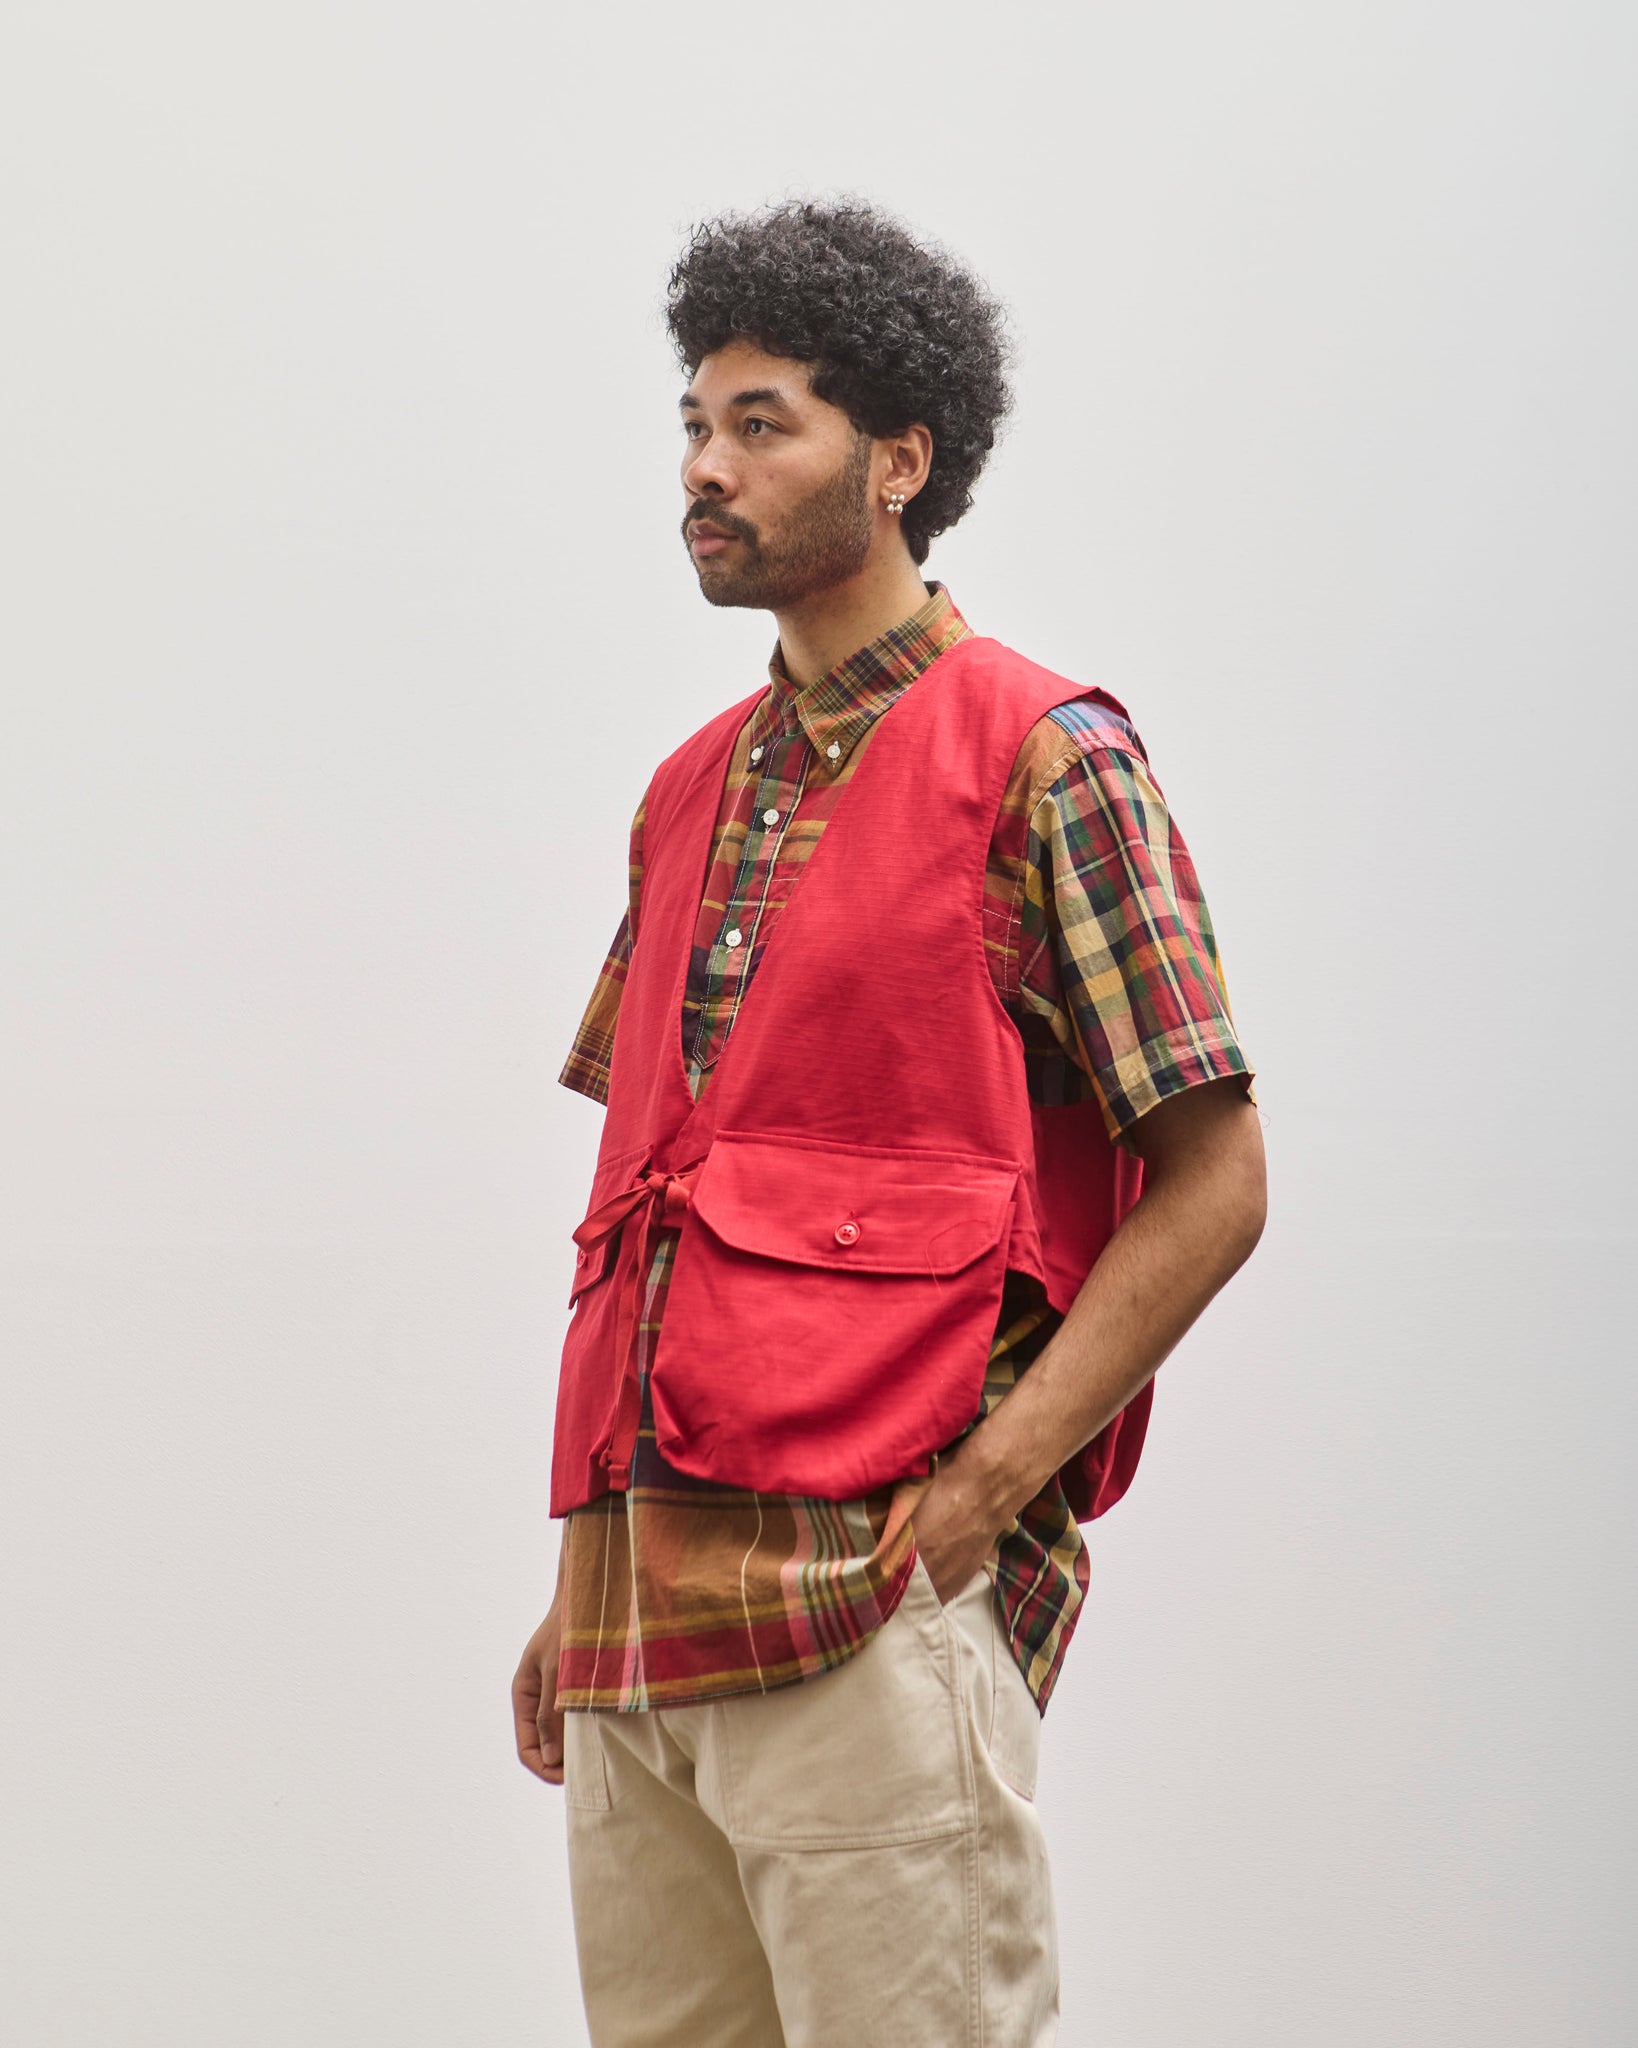 Engineered Garments Ripstop Fowl Vest, Red